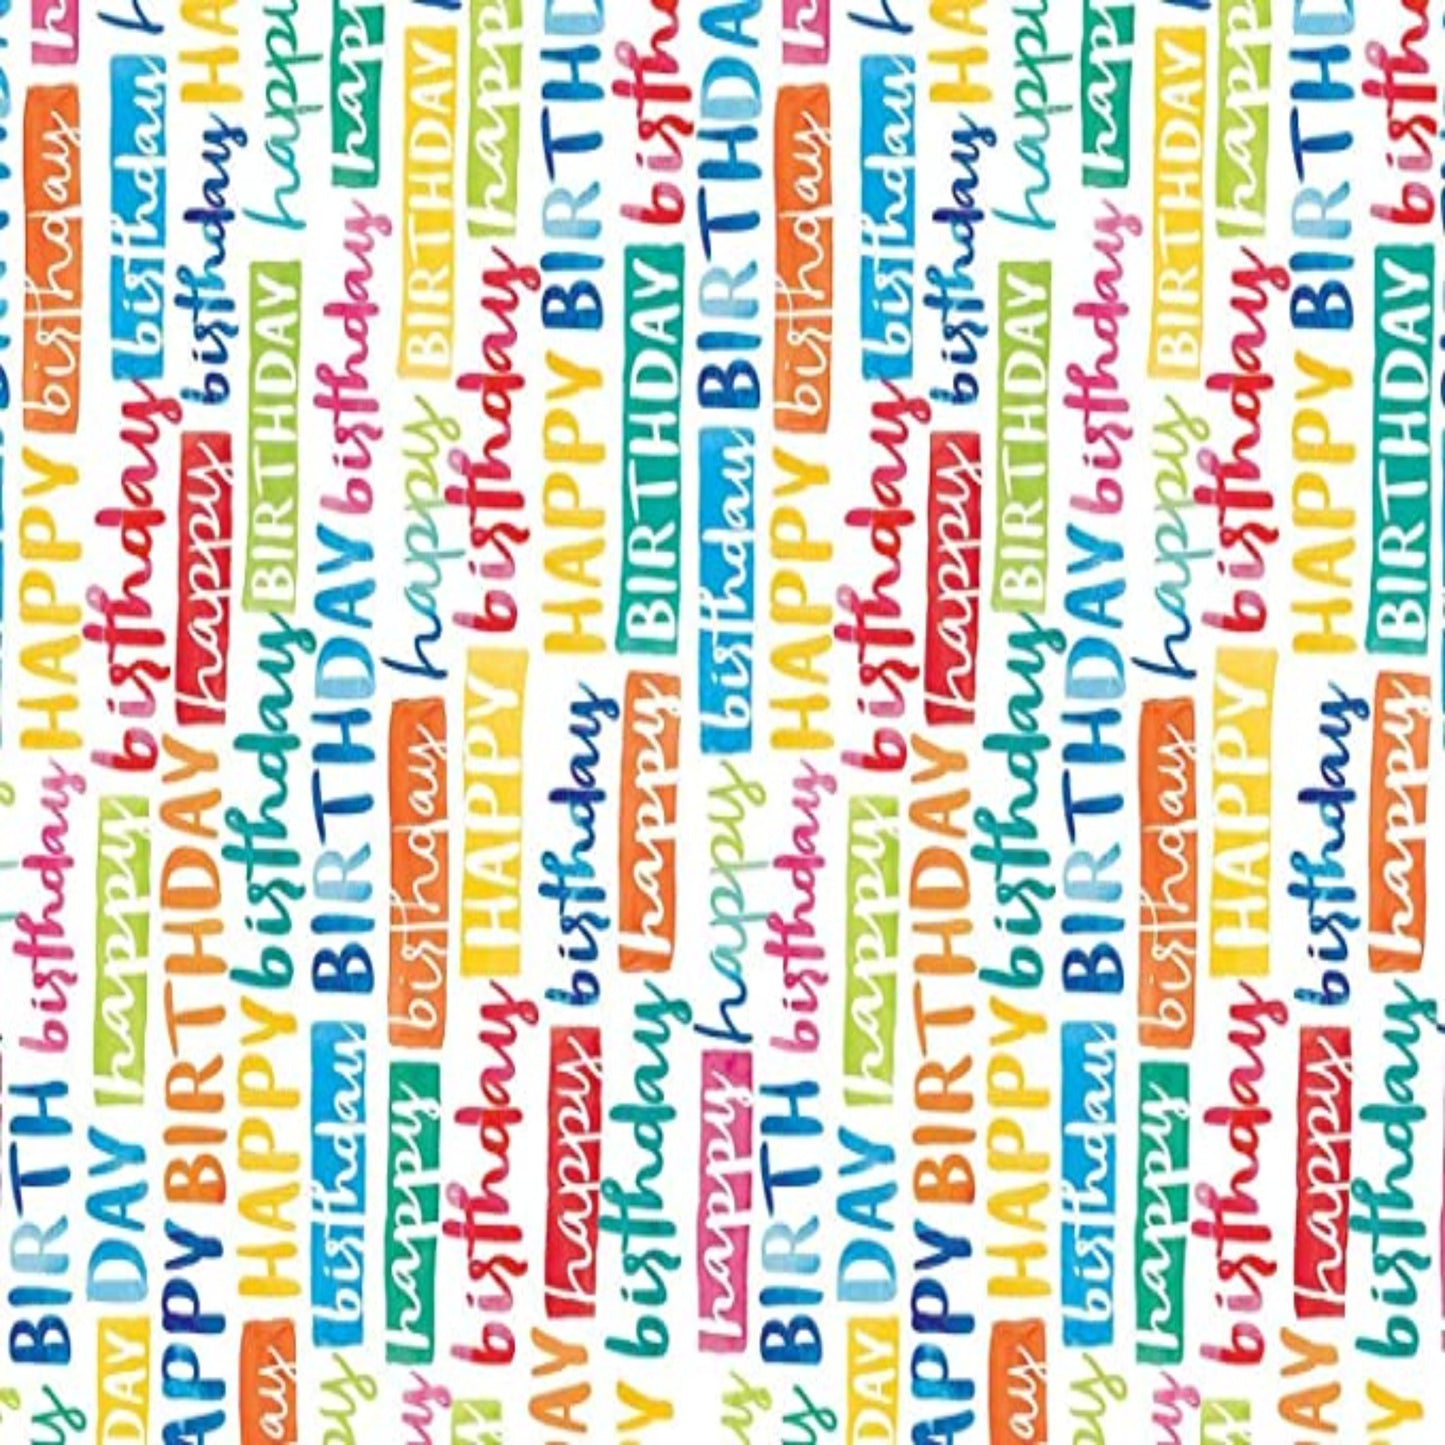 AccuPrints Design Happy Birthday Wrapping Paper Sheets (20 x 30 inch)